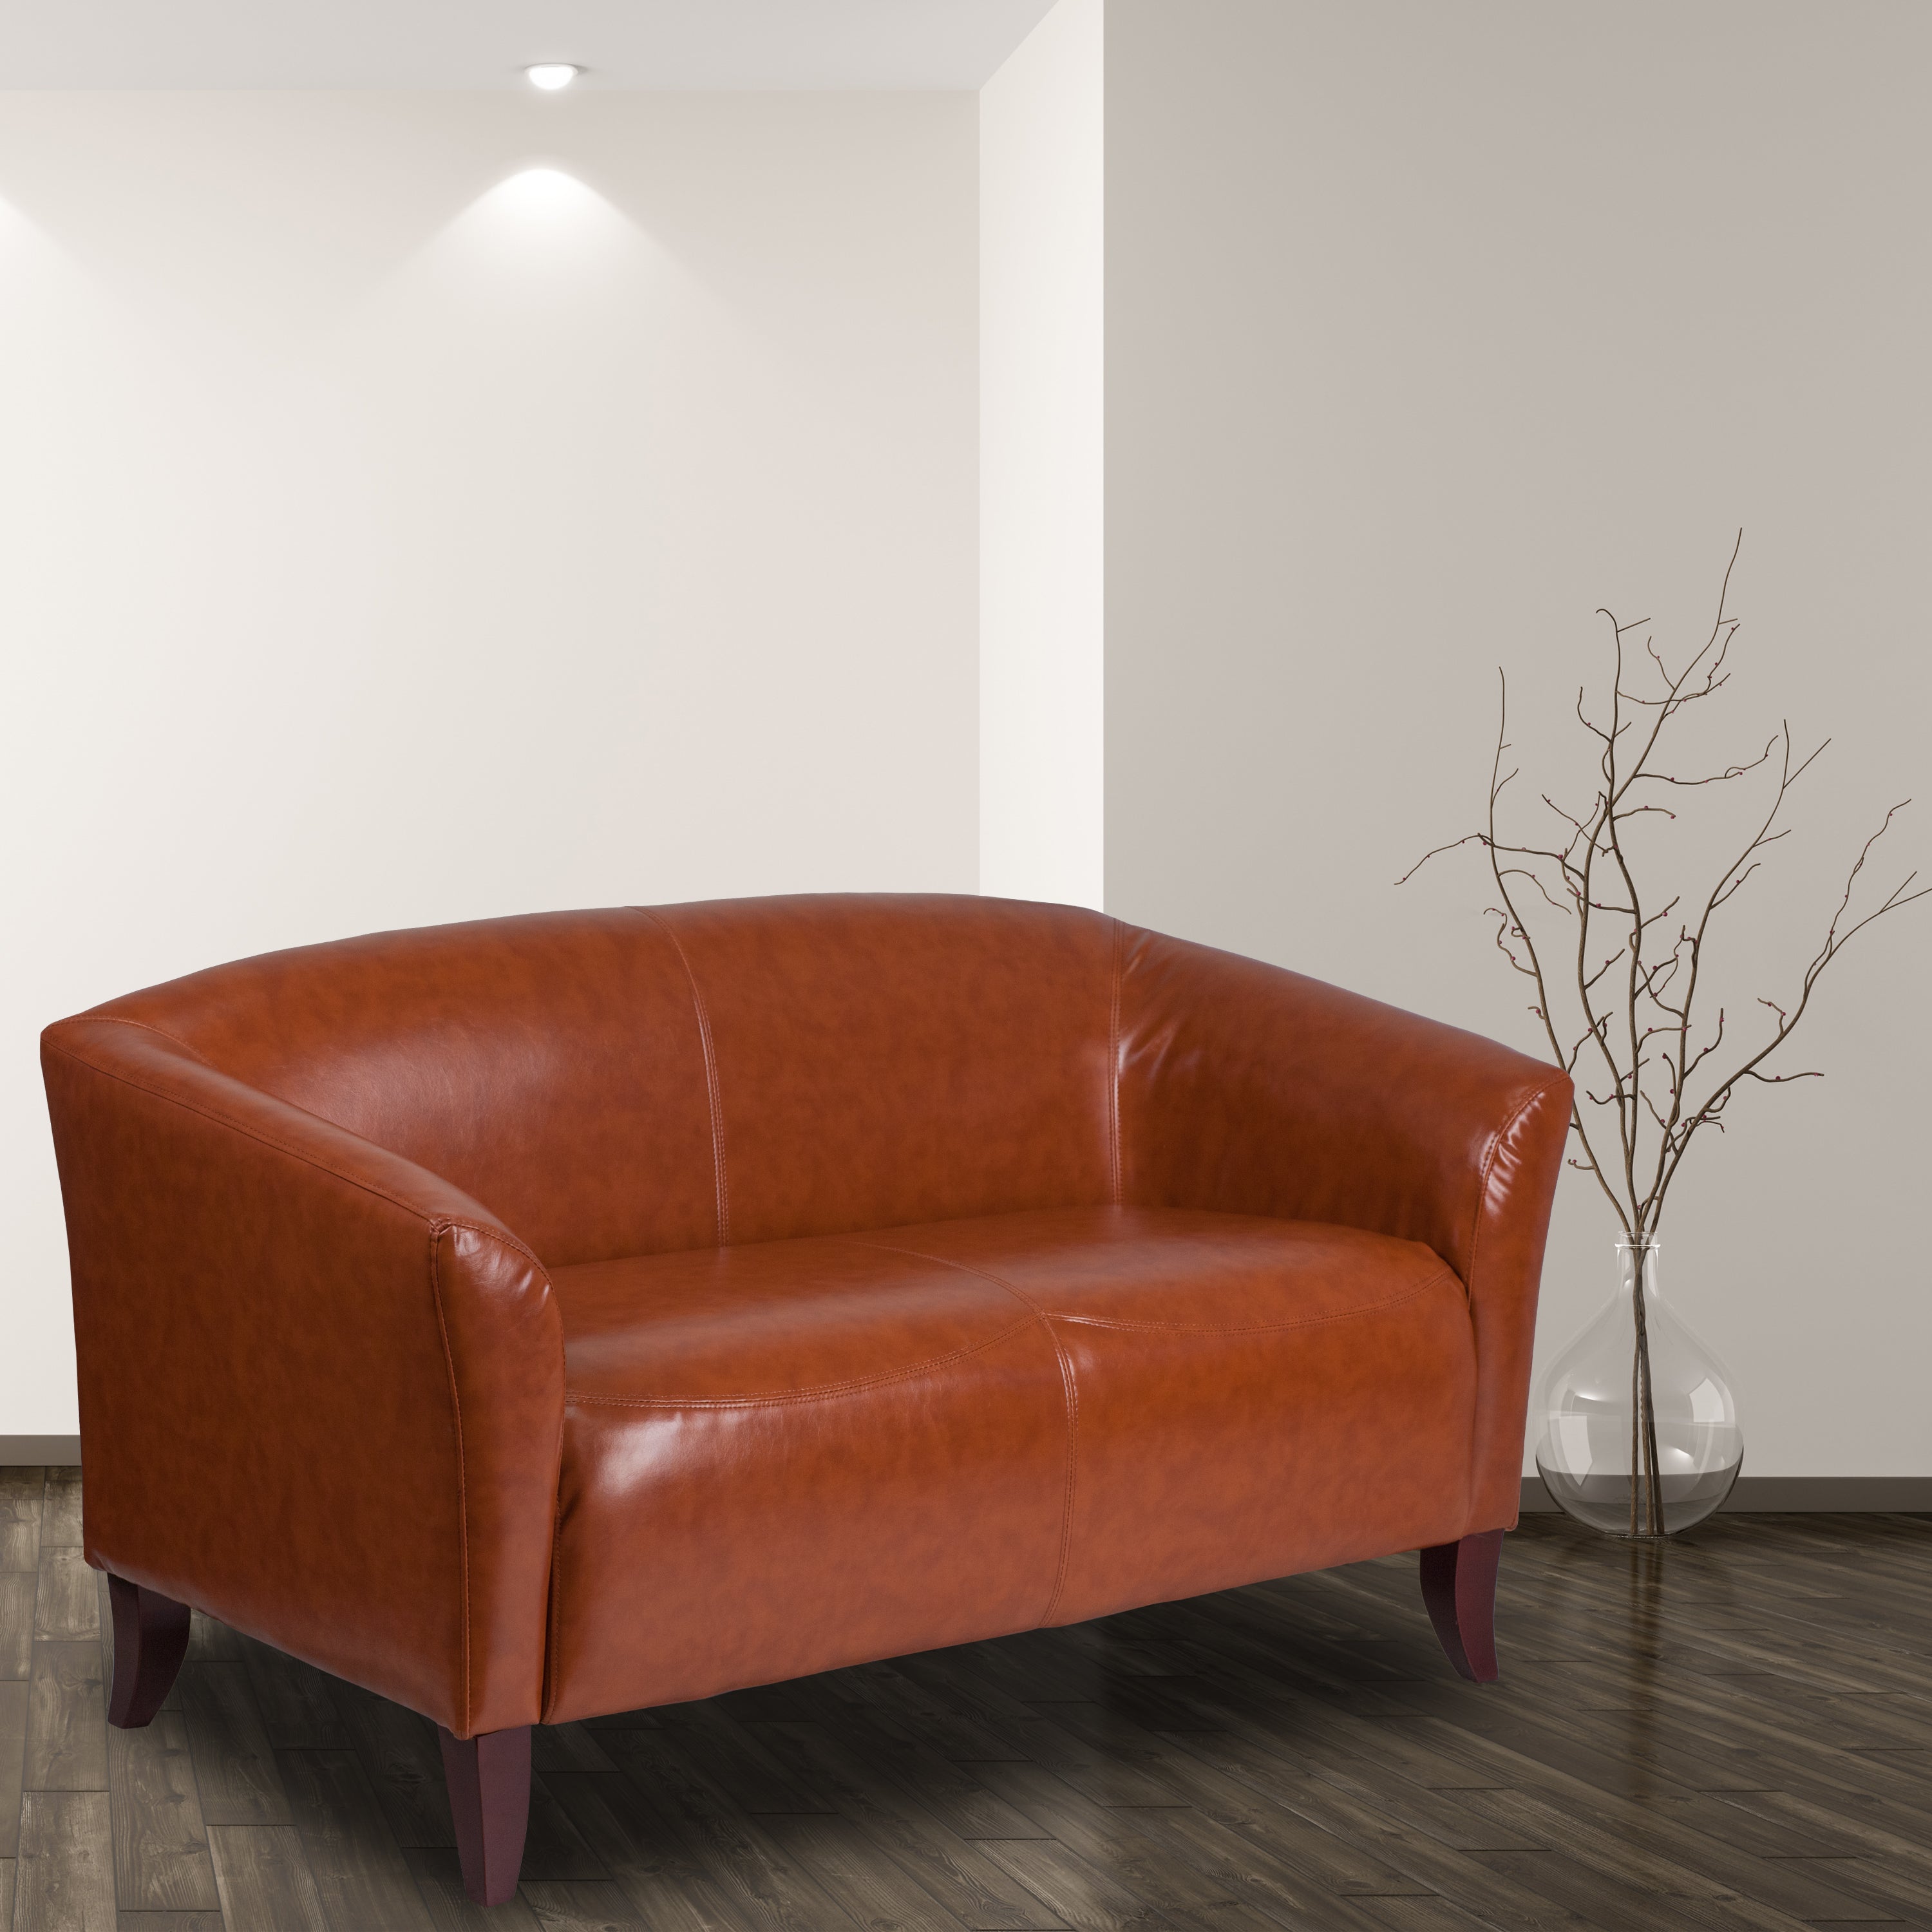 HERCULES Imperial Series LeatherSoft Loveseat with Cherry Wood Feet-Reception Loveseat-Flash Furniture-Wall2Wall Furnishings